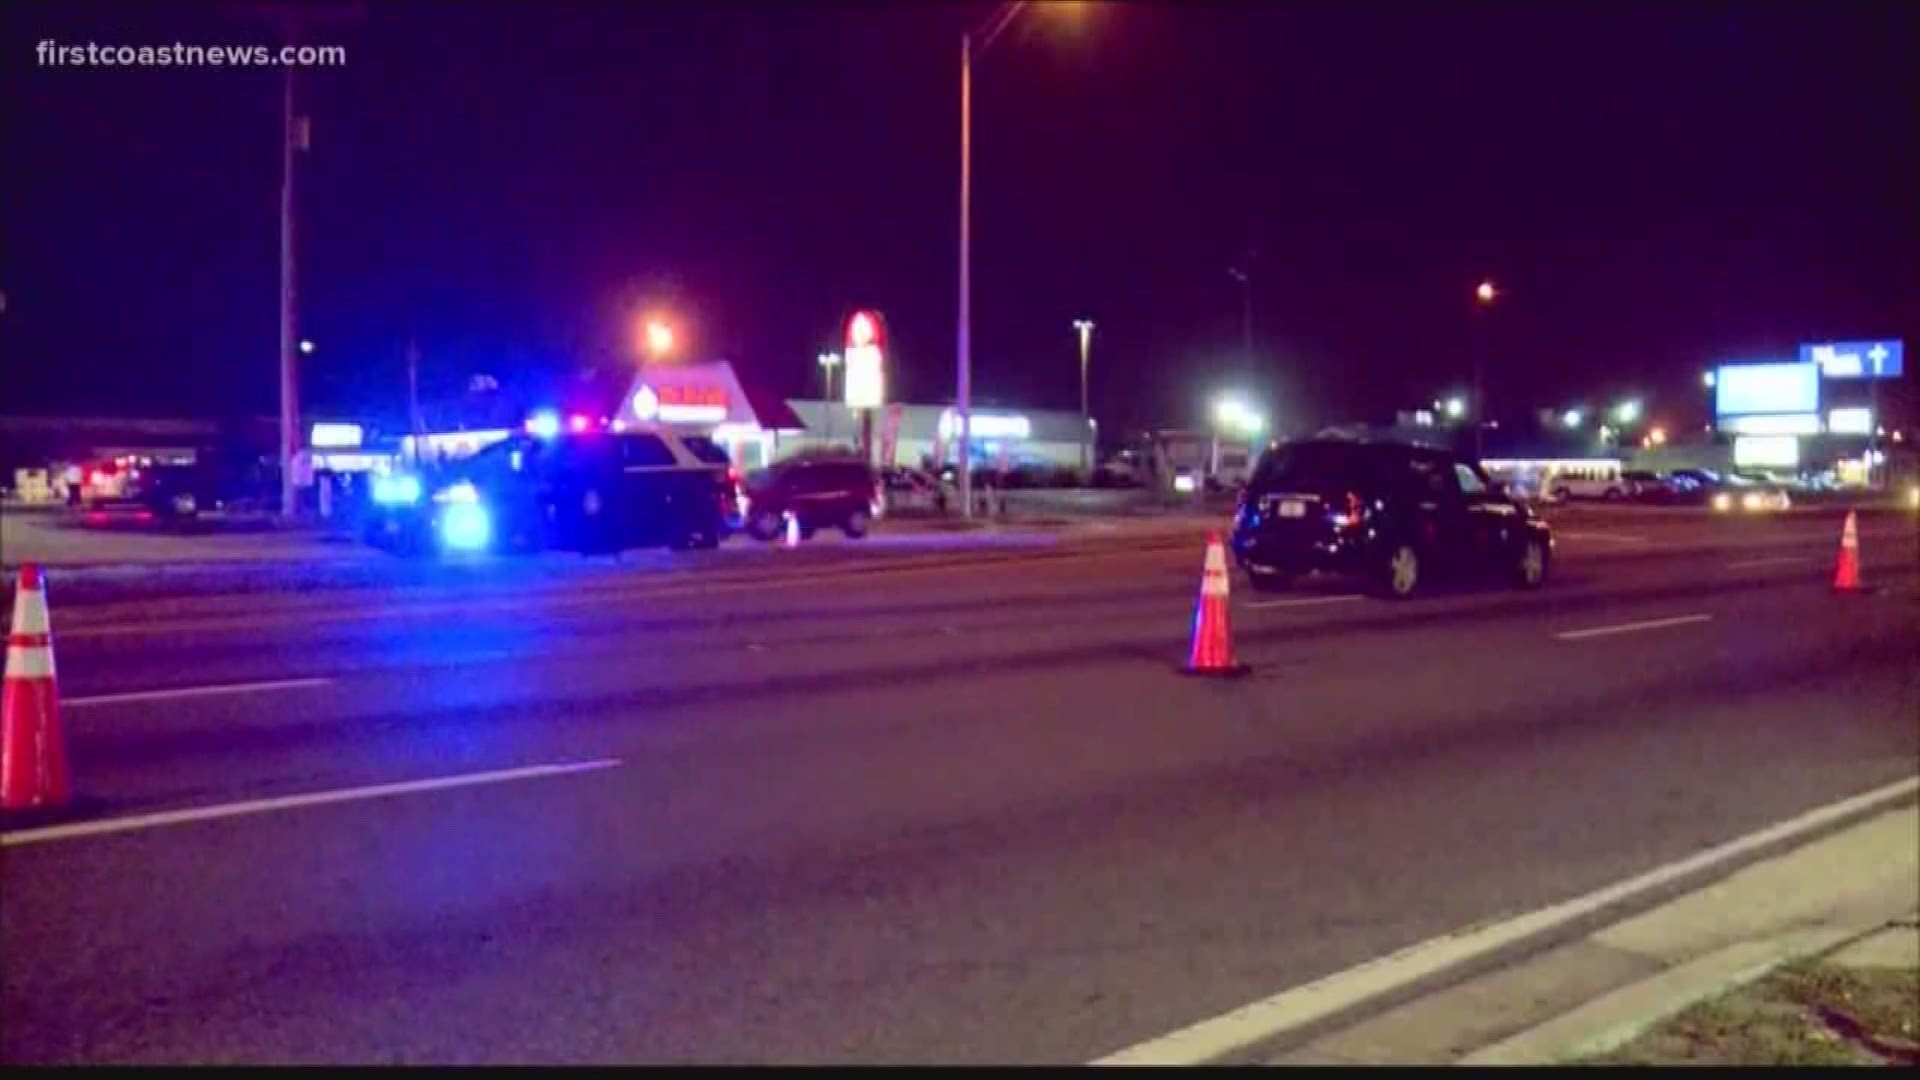 The Florida Highway Patrol said the pedestrian was struck at Blanding Boulevard and Spencer Road a little before 9:30 p.m.